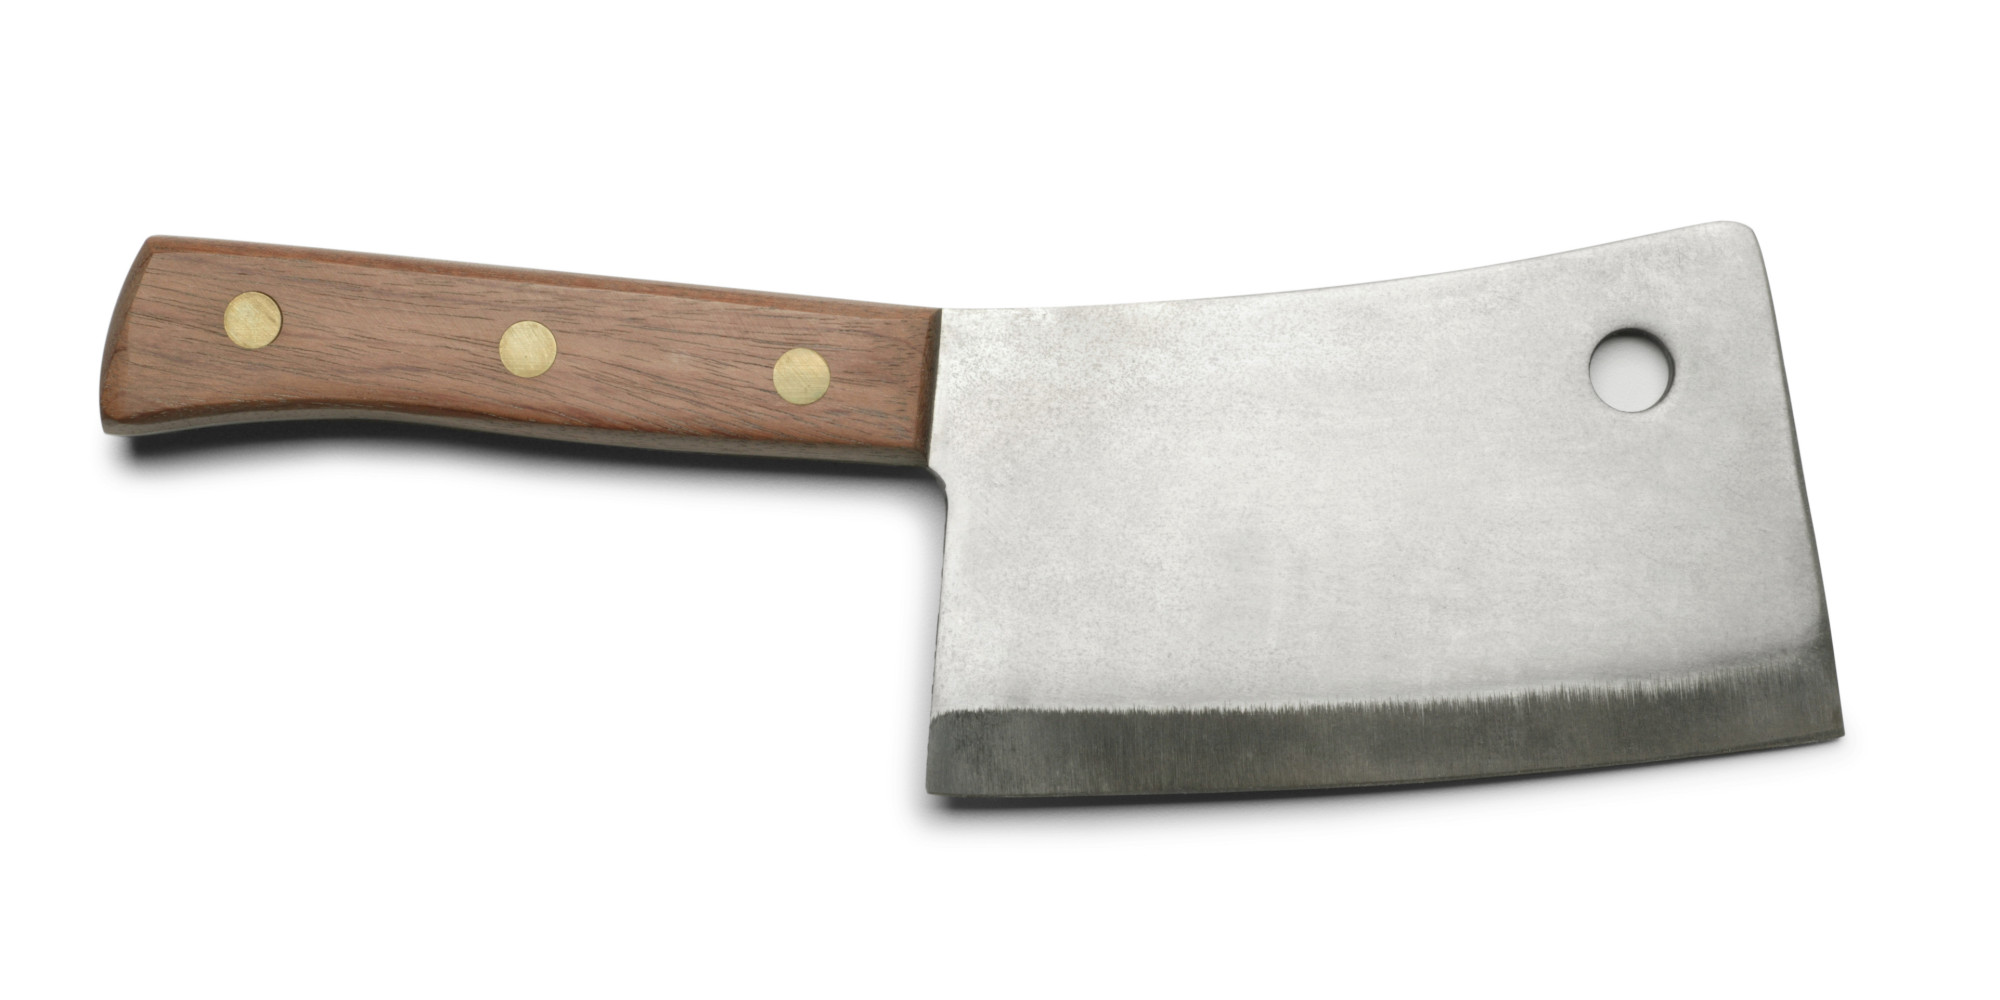 Respond To Men Wielding Meat Cleavers Axe In Separate Incidents